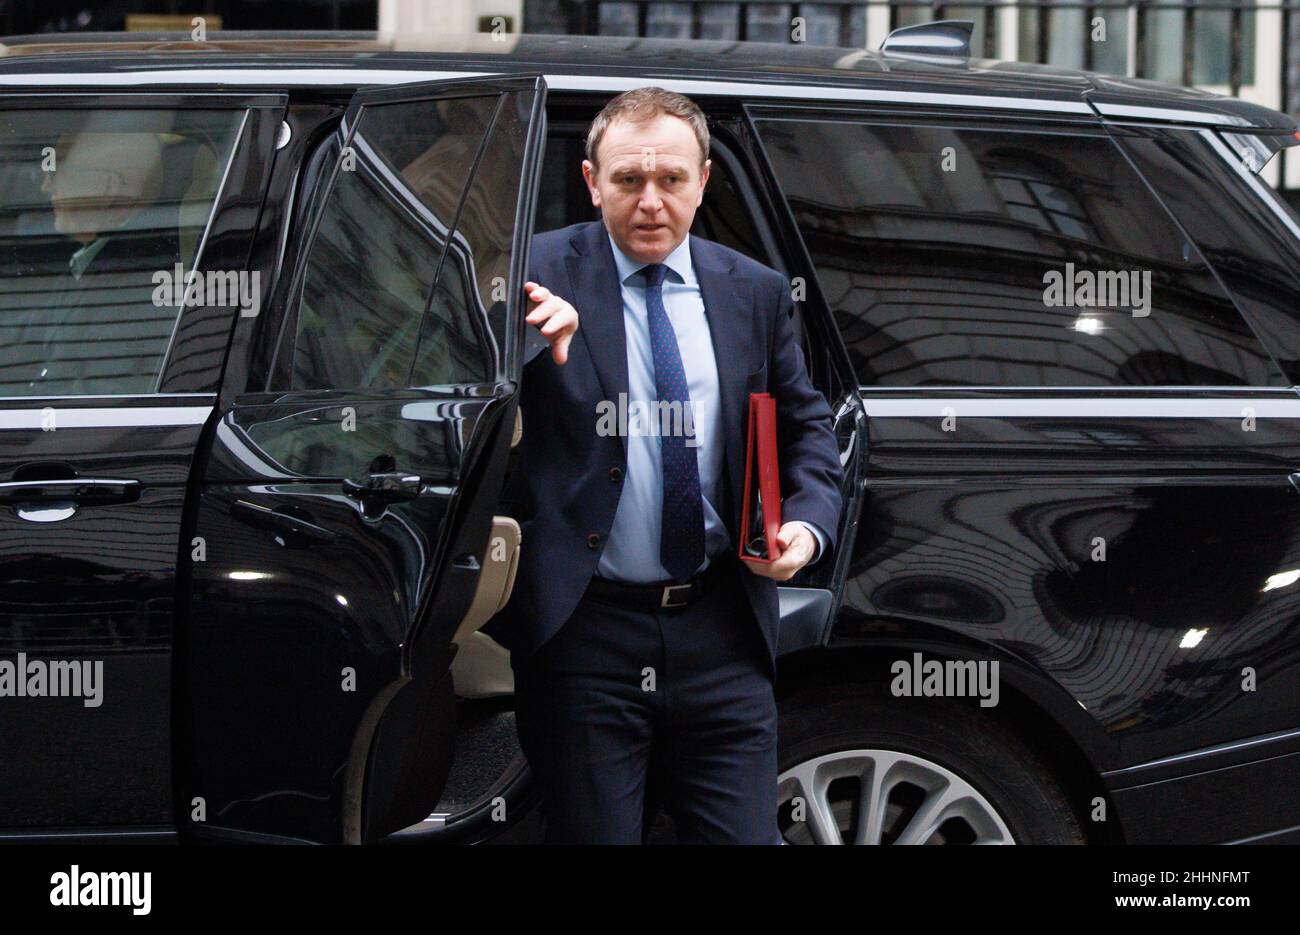 London, UK. 25th Jan, 2022. George Eustice, Secretary of State for Environment, Food and Rural Affairs, attends the weekly Cabinet meeting in Downing Street. Prime Minister, Boris Johnson, is under intense pressure following allegations of various parties at Number 10. Credit: Mark Thomas/Alamy Live News Stock Photo